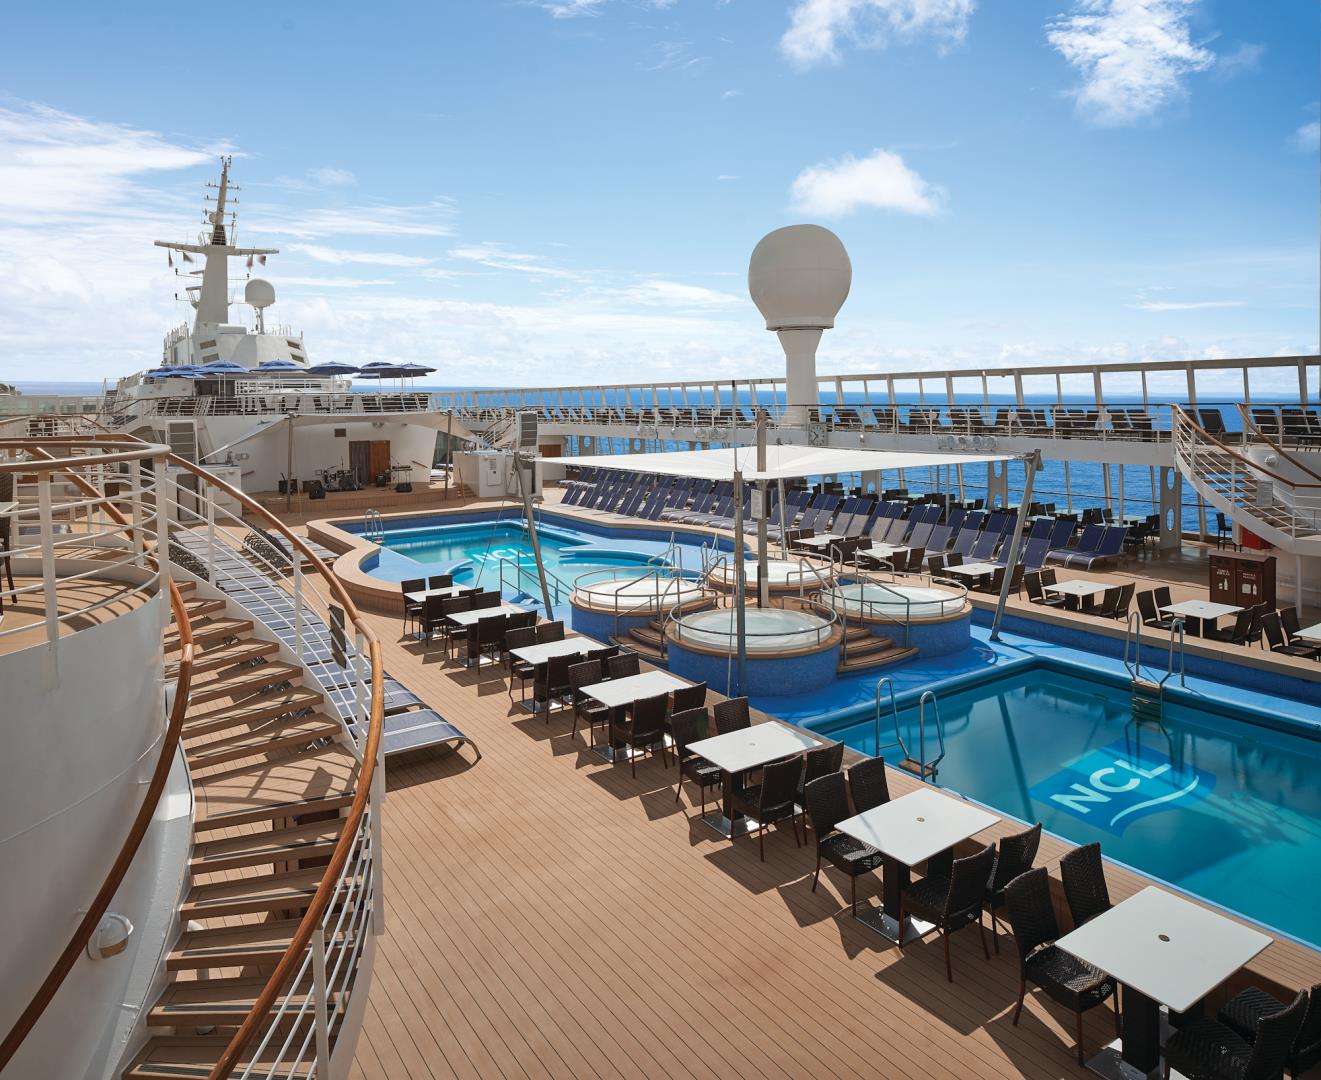 9-day Cruise to Mediterranean: Italy, France & Spain from Rome (Civitavecchia), Italy on Norwegian Sky